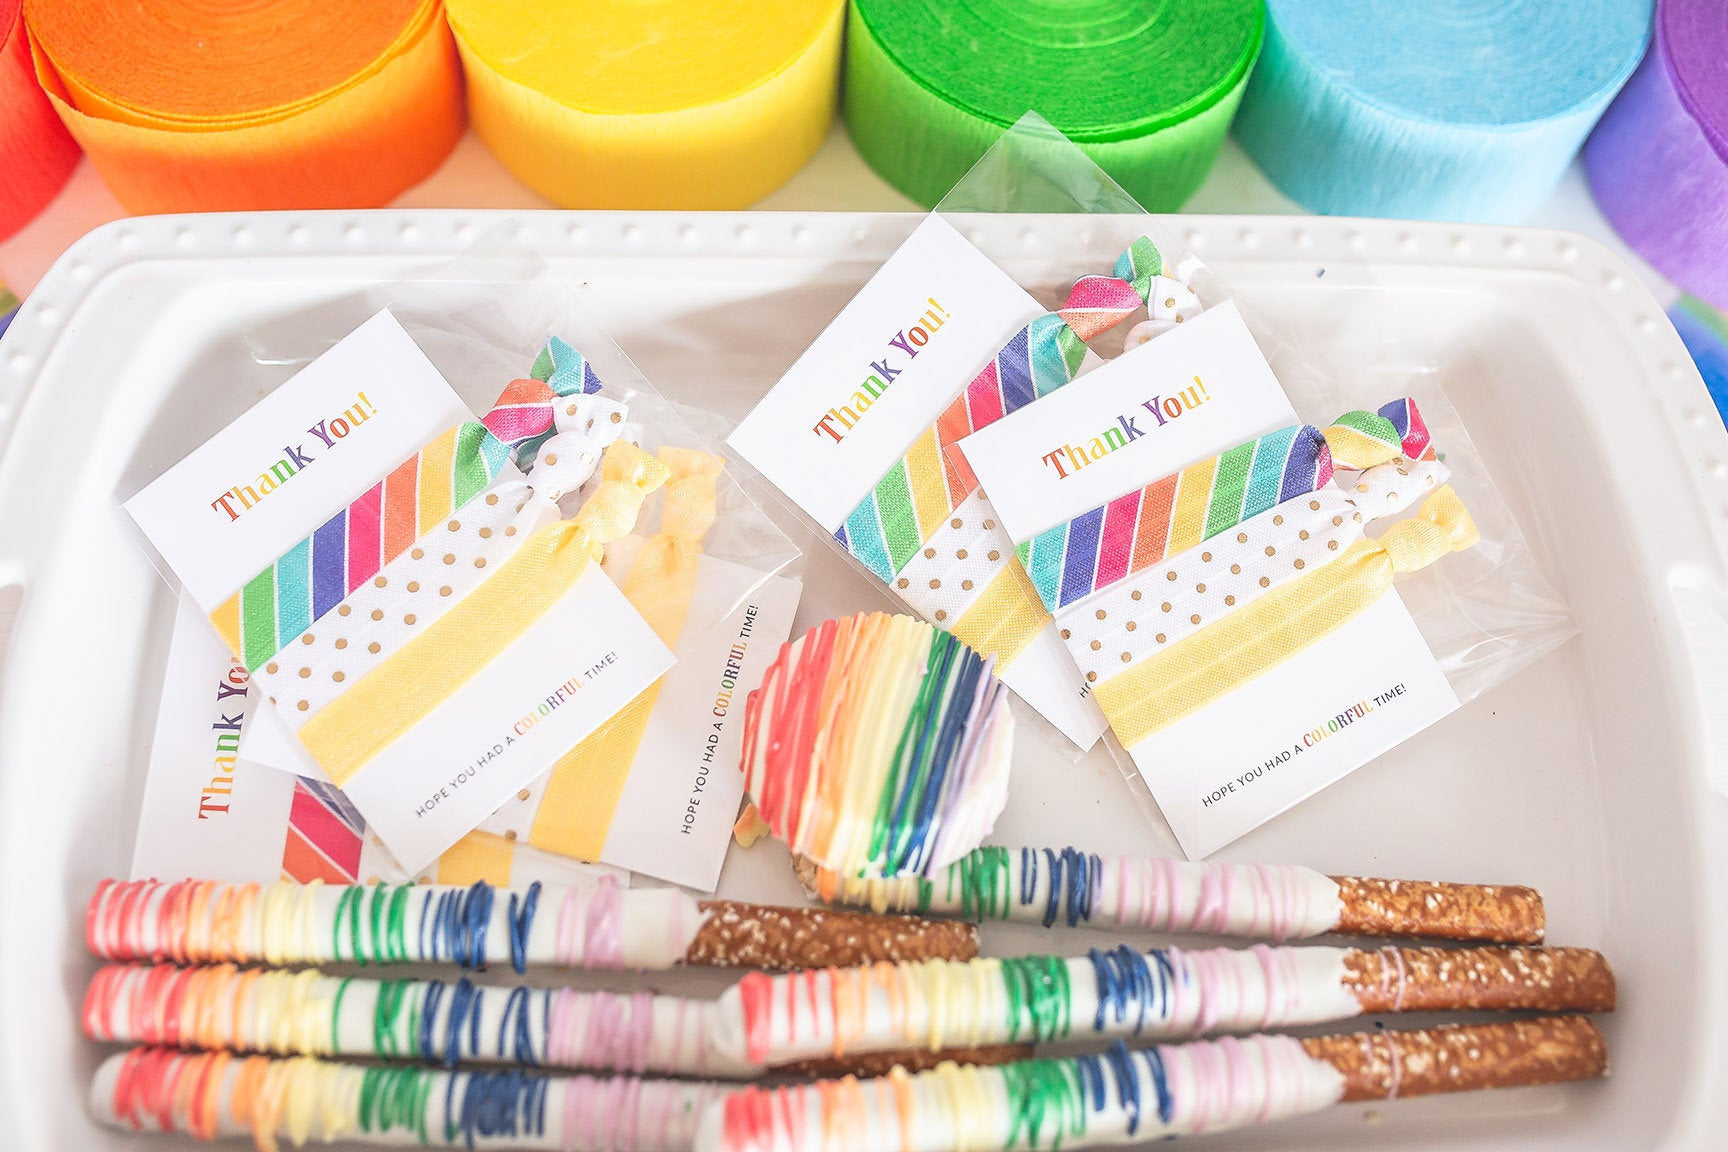 Rainbow Party Favors, Rainbow Party Supplies, Rainbow Party Decorations, Summer Party Favors, Rainbow Birthday Party Favors, Hair Tie Favors - @PlumPolkaDot 